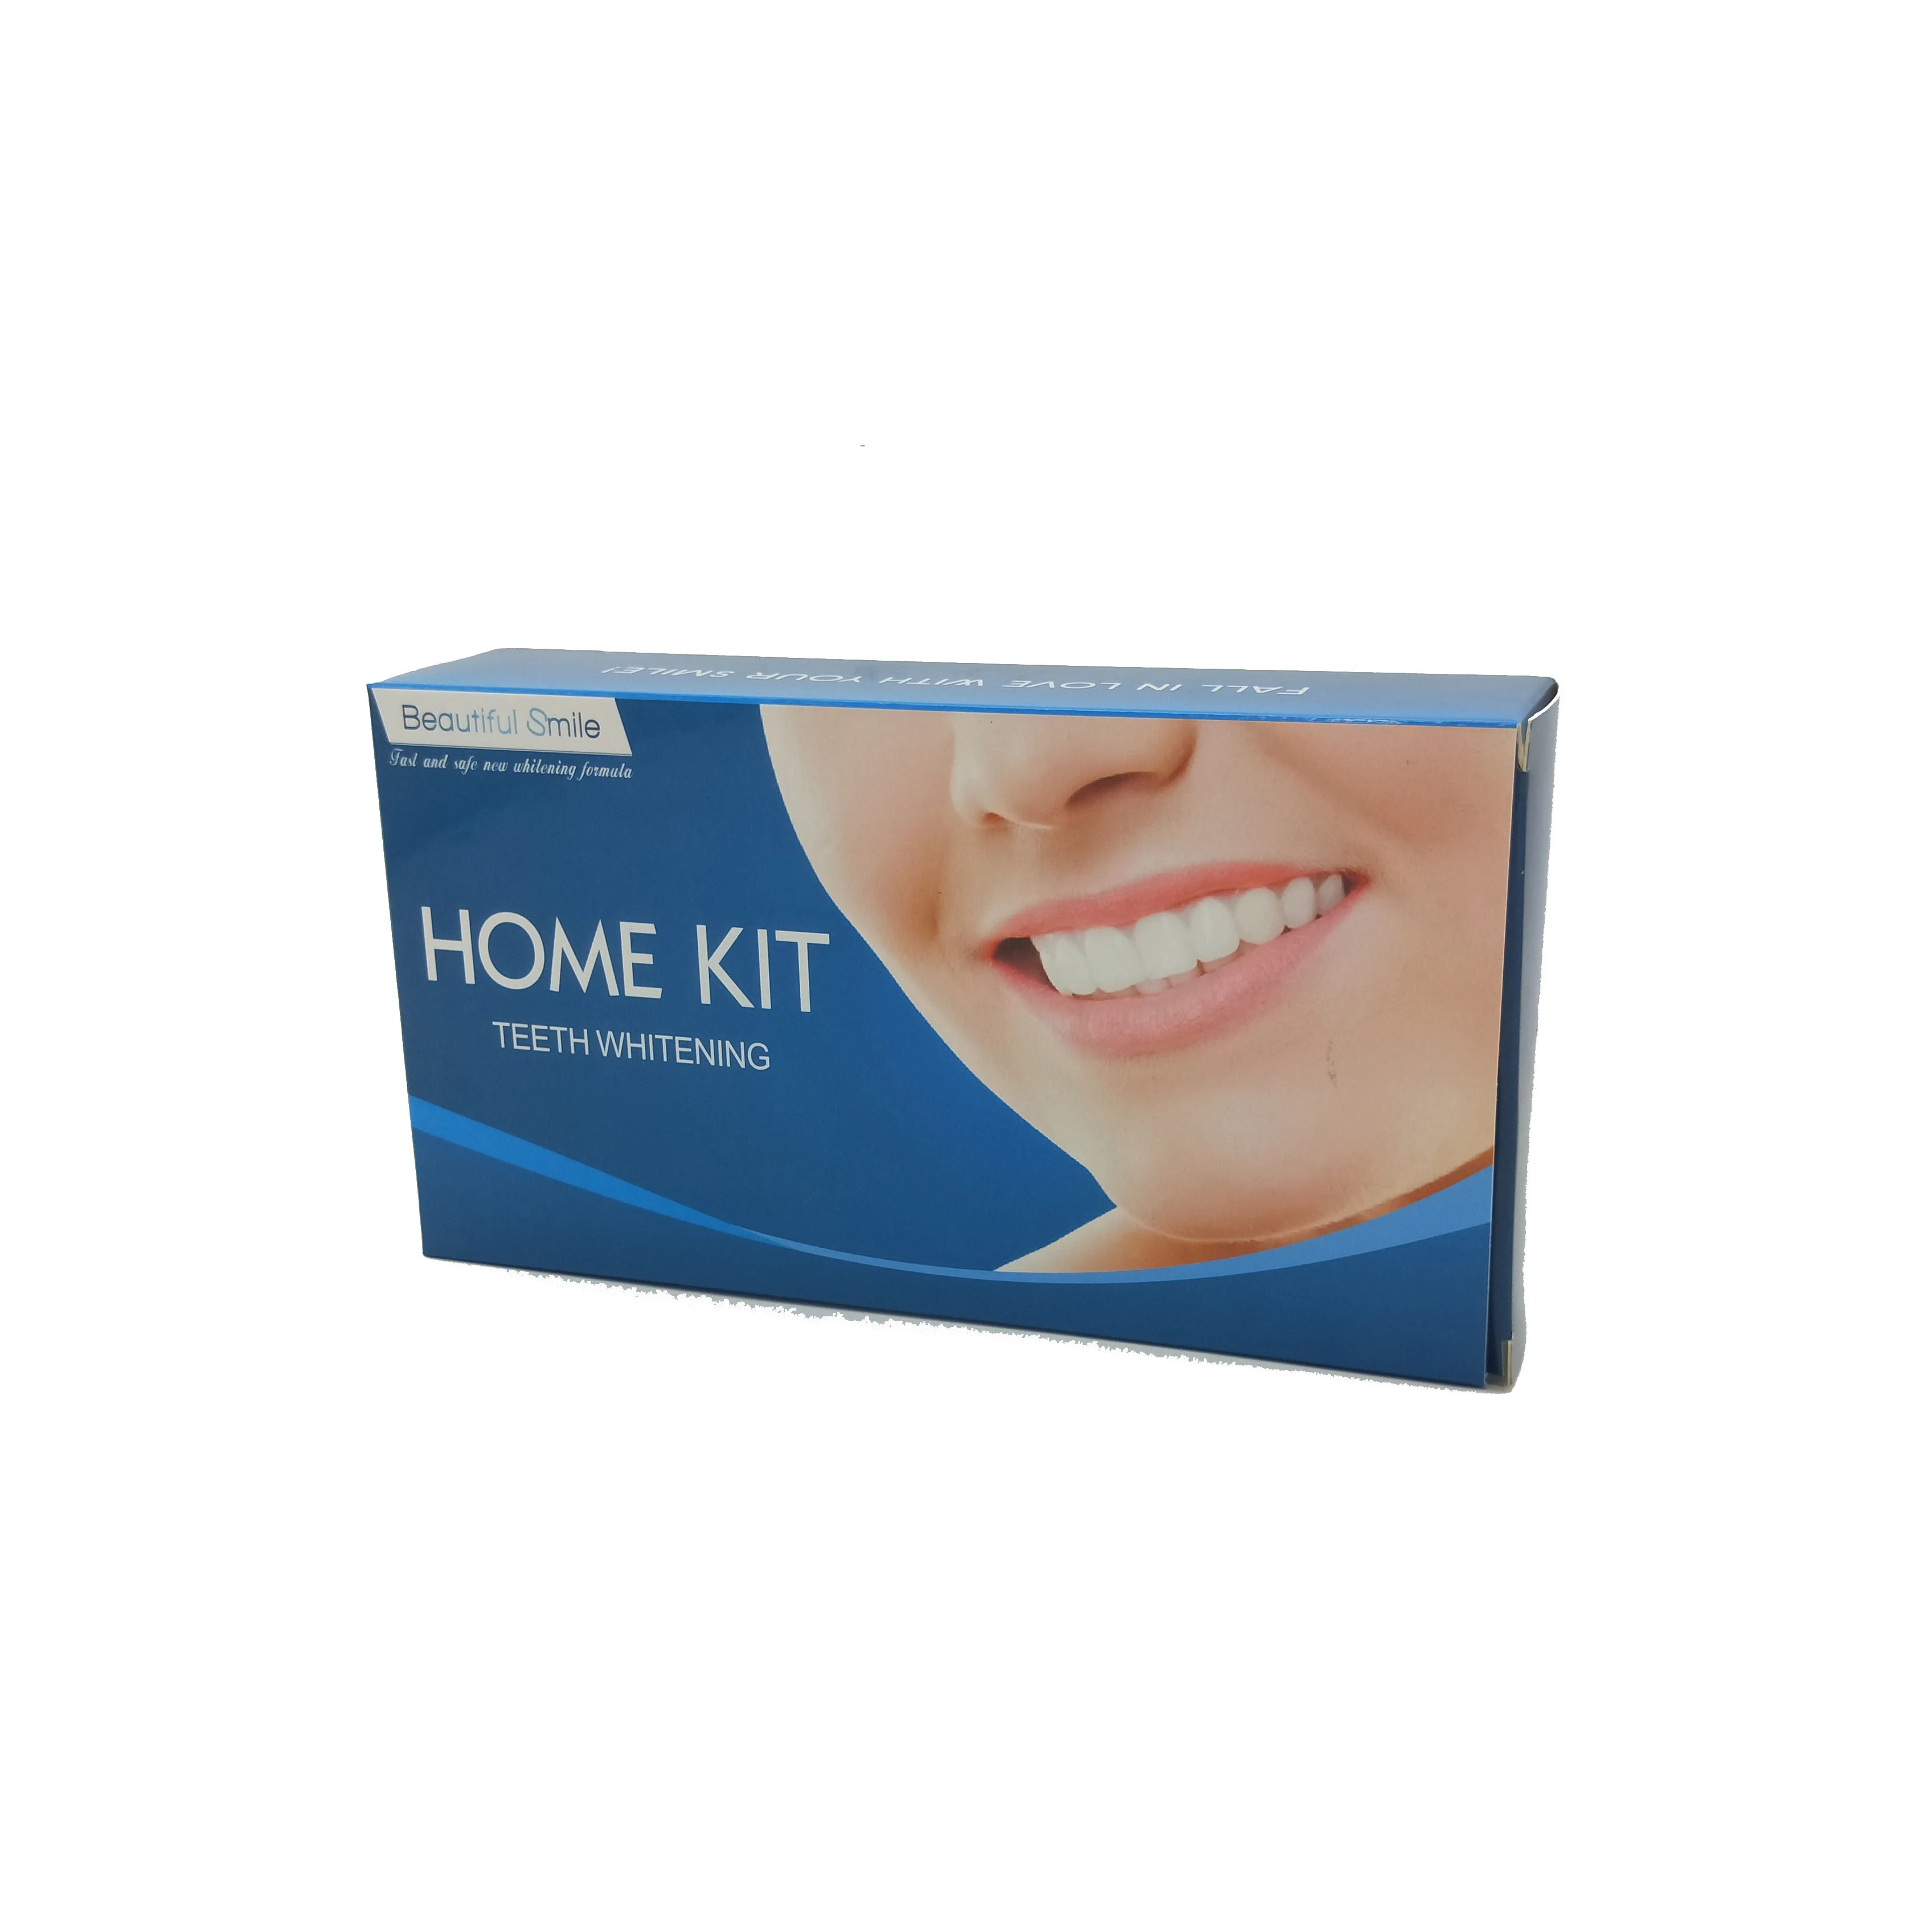 Hot sale classical home tooth whitening kit